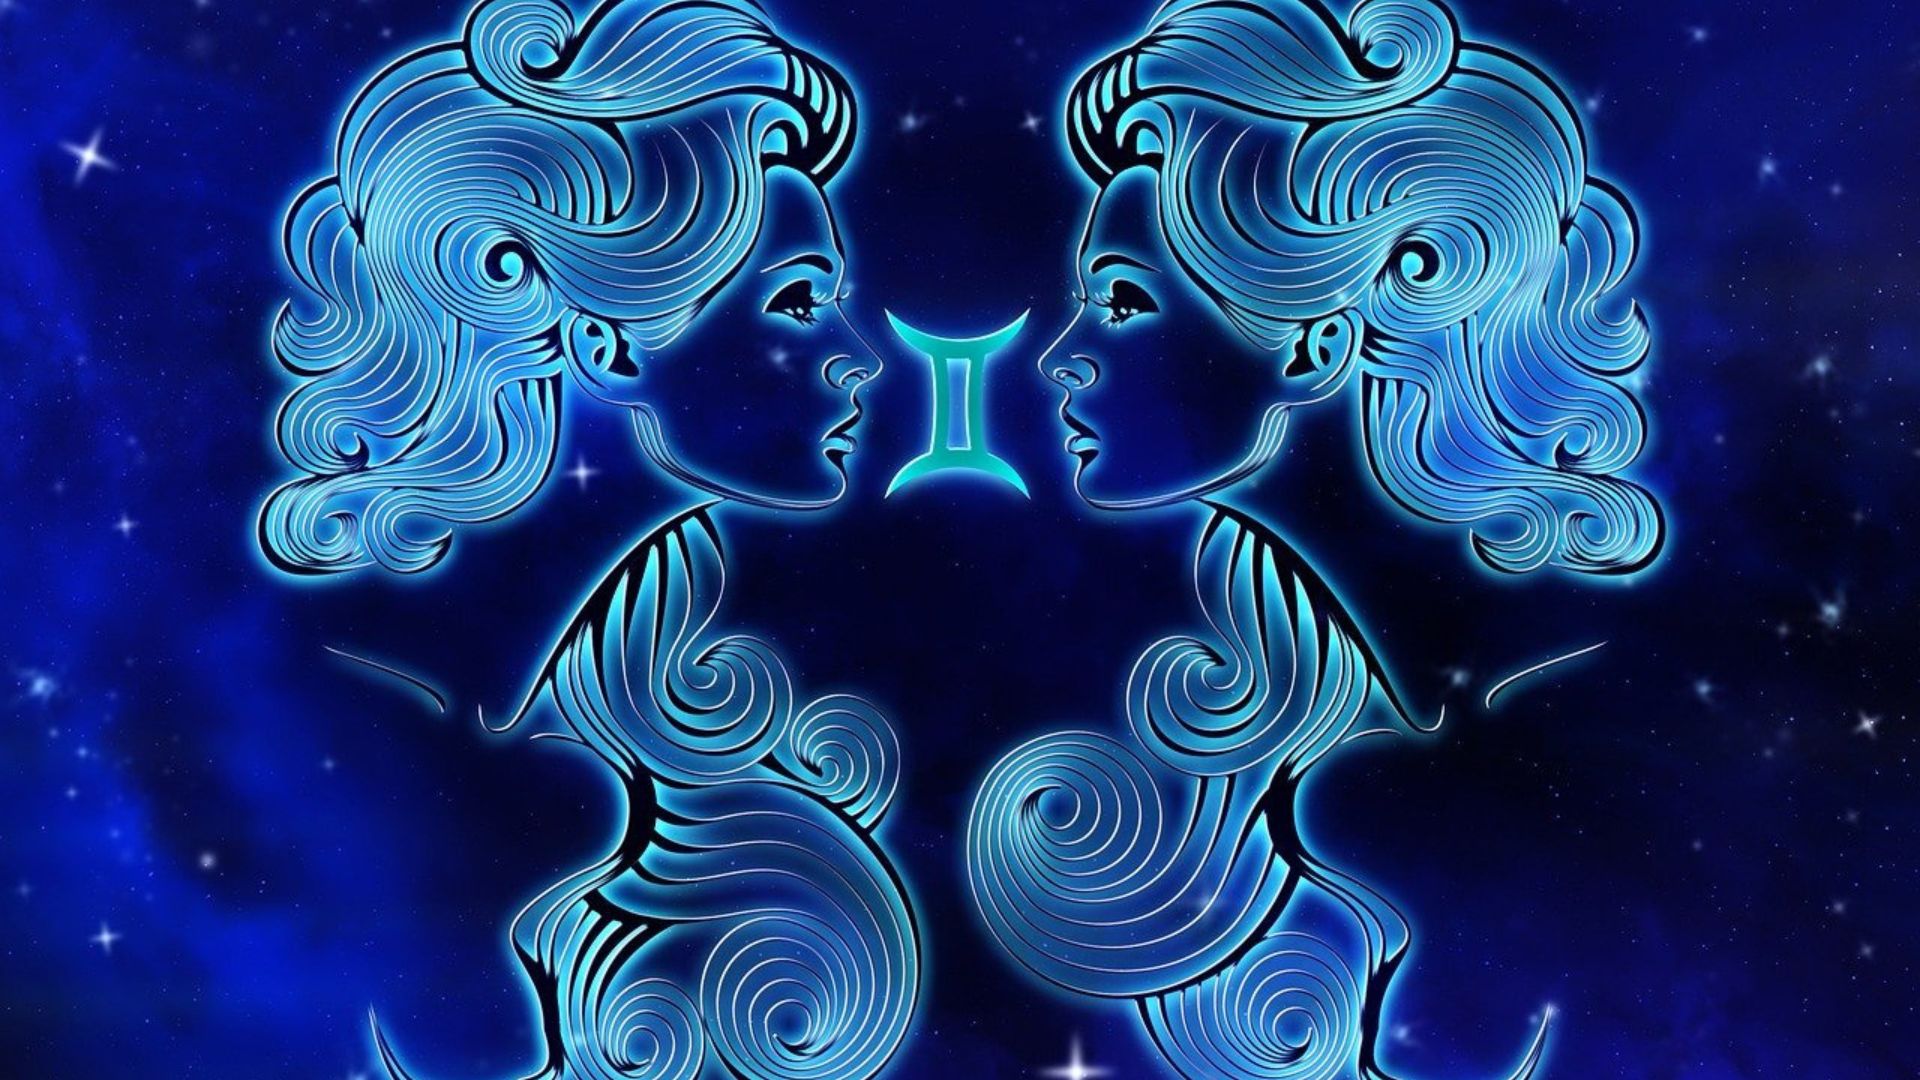 Gemini Sign In Blue Color Shows Two Women Face To Face